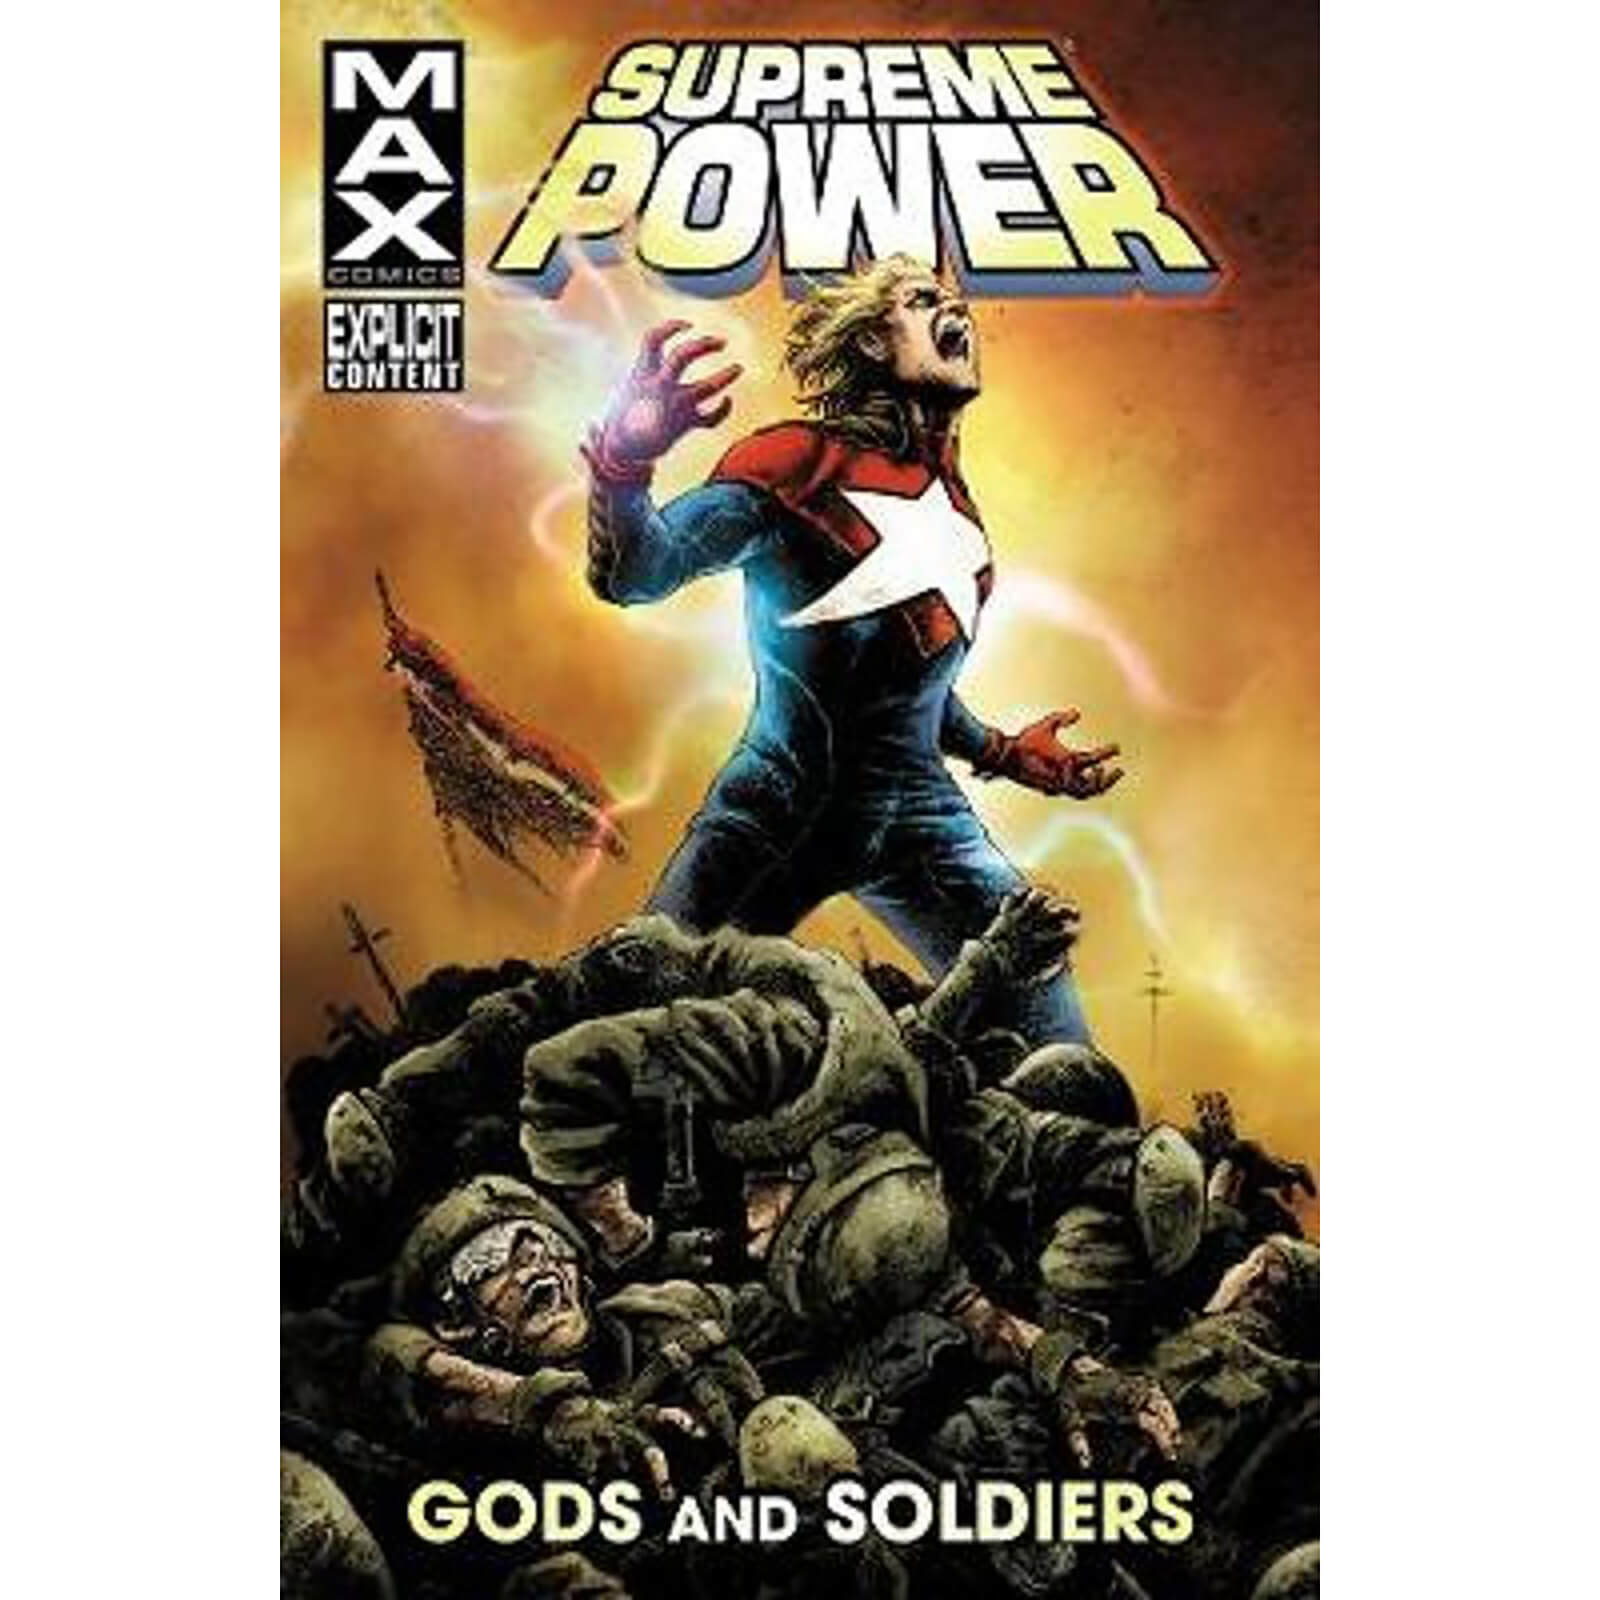 Supreme Power Gods And Soldiers Trade Paperback